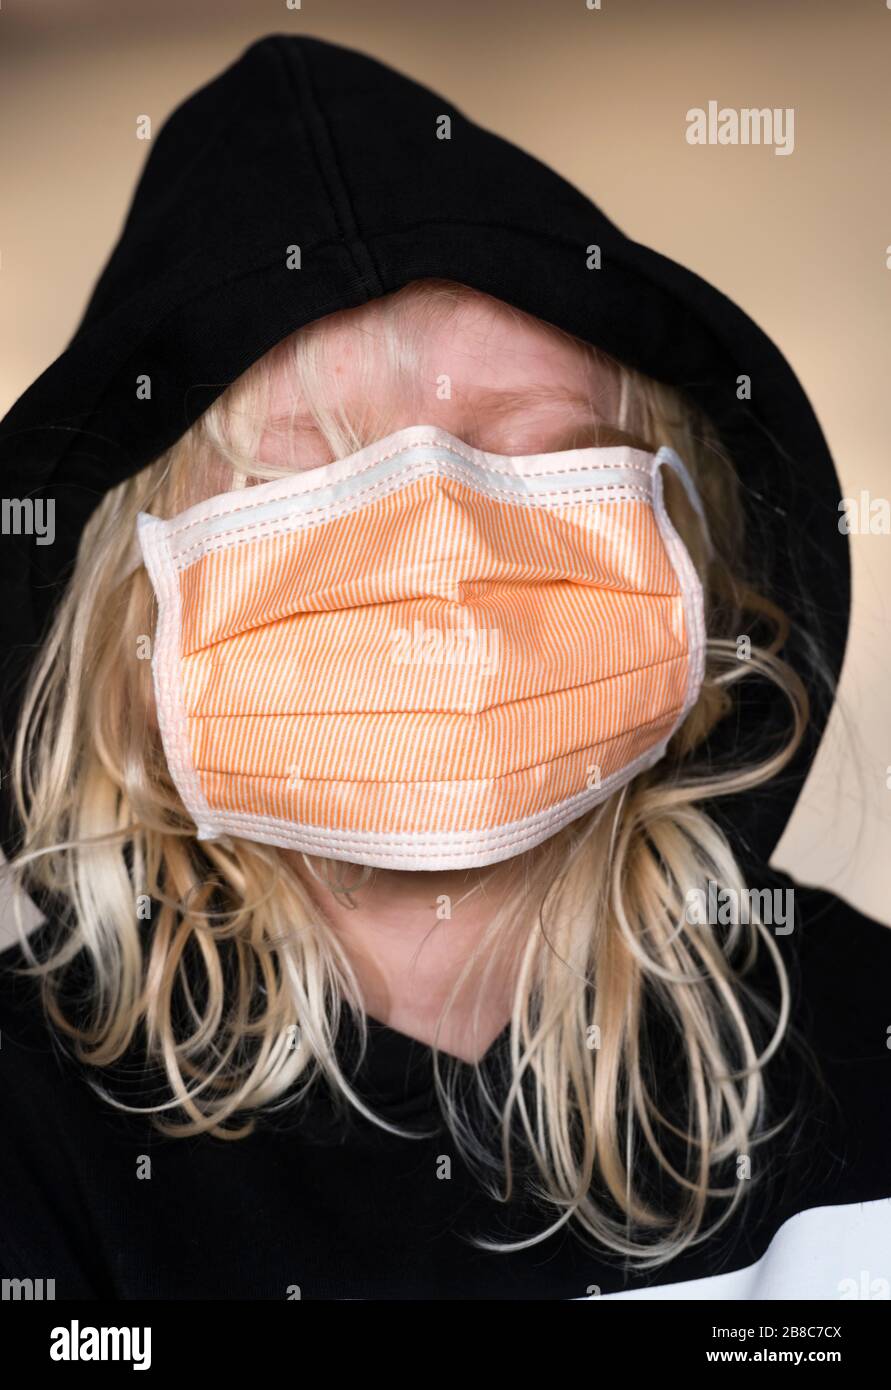 12-year old boy with long blond hair is wearing an infection protection face mask and black hoodie. Caucasian ethnicity, face covered completely by fa Stock Photo